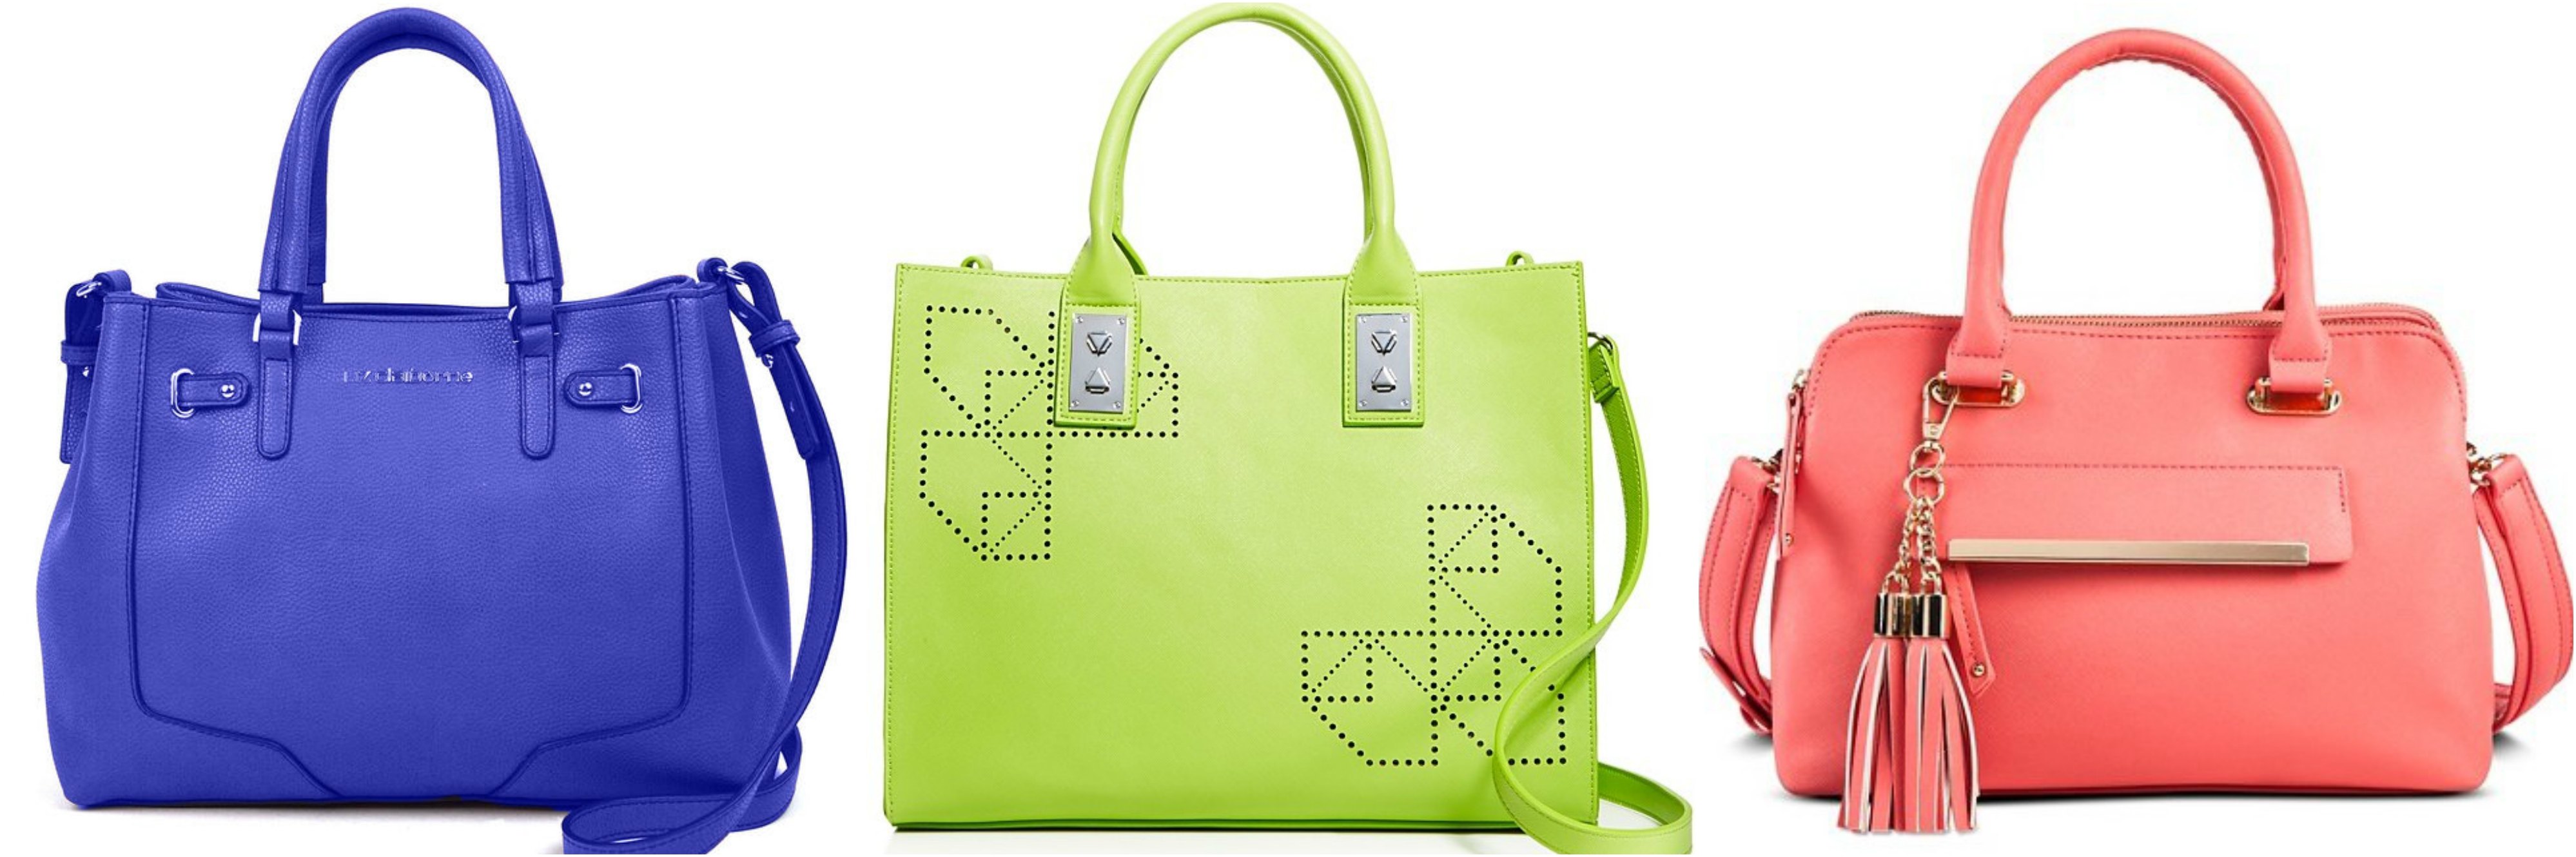 What I'm Shopping For // Colorful Handbags - Drew & Alice